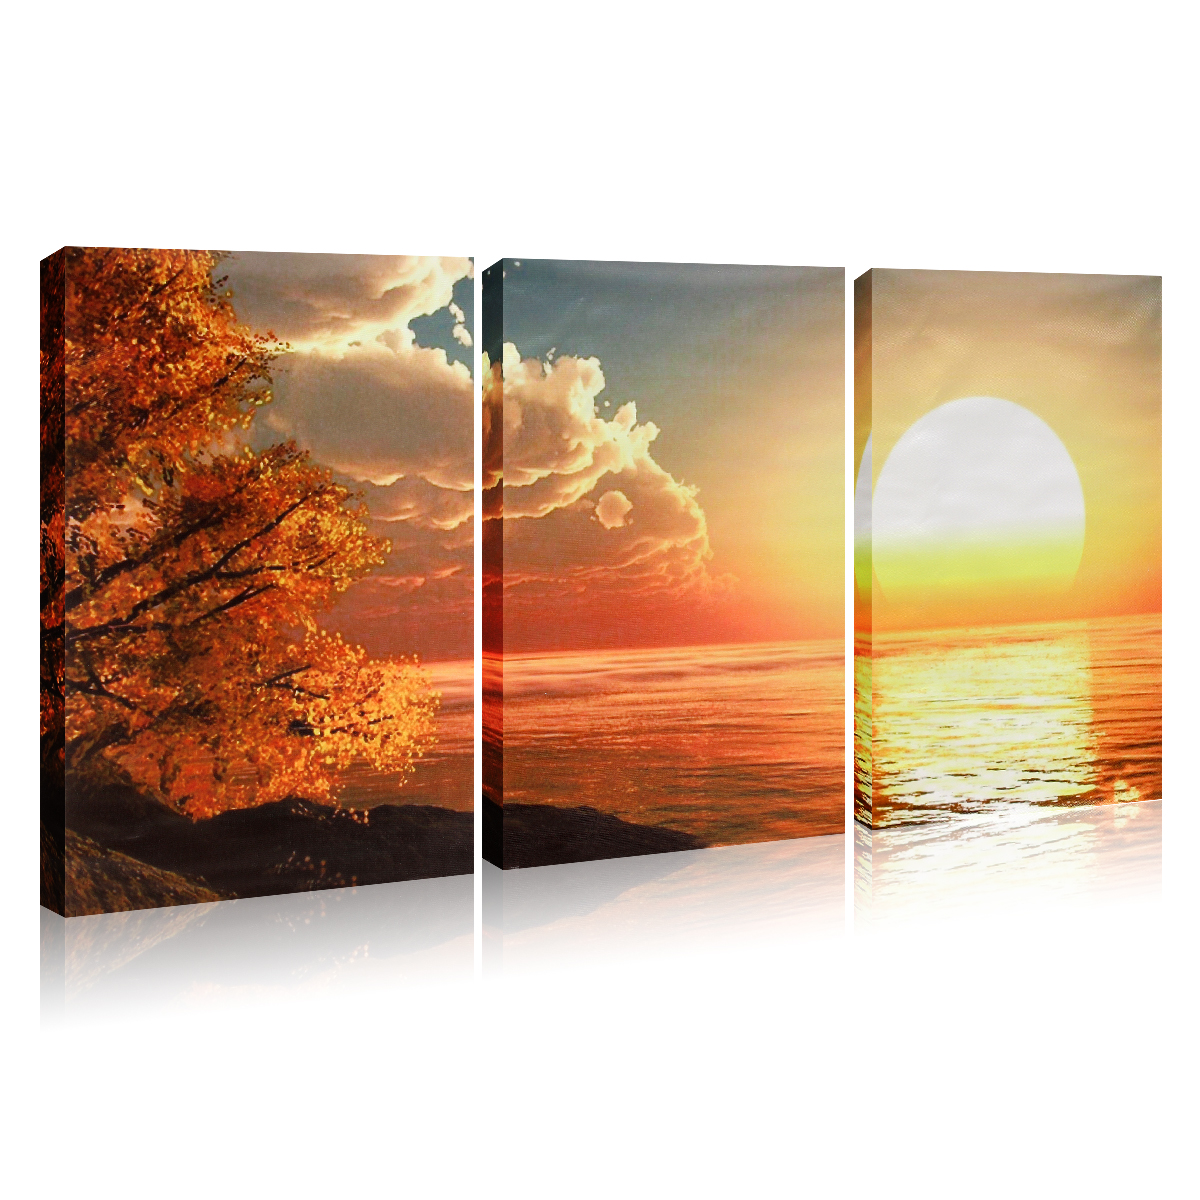 3-Cascade-Day-Sunset-Scene-Canvas-Painting-Decorative-Wall-Picture-Home-Decoration-Unframed-1117195